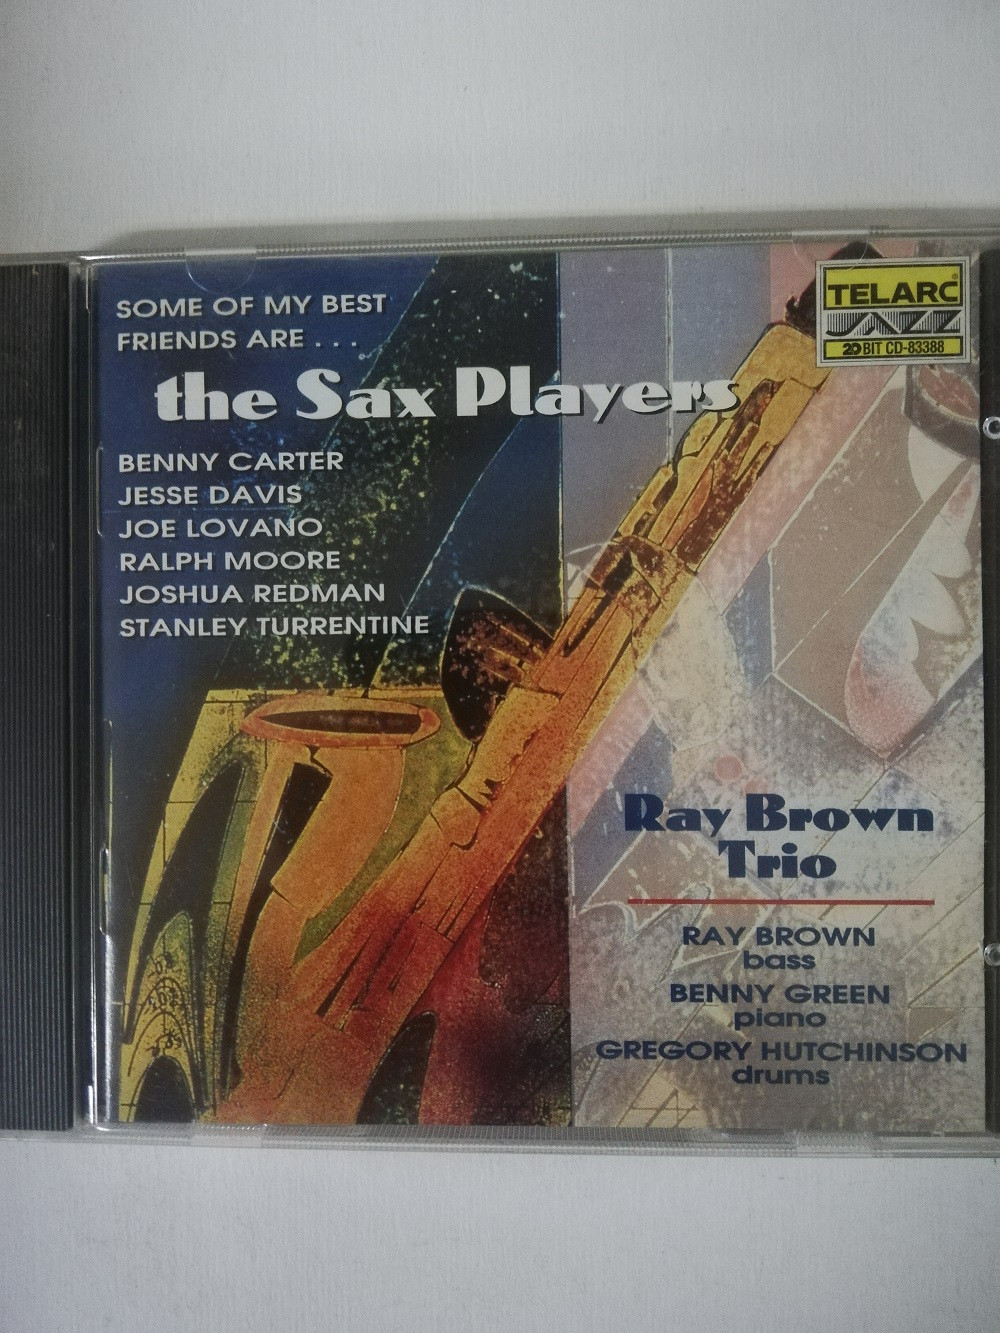 Imagen CD RAY BROWN TRIO - THE SAX PLAYERS  1